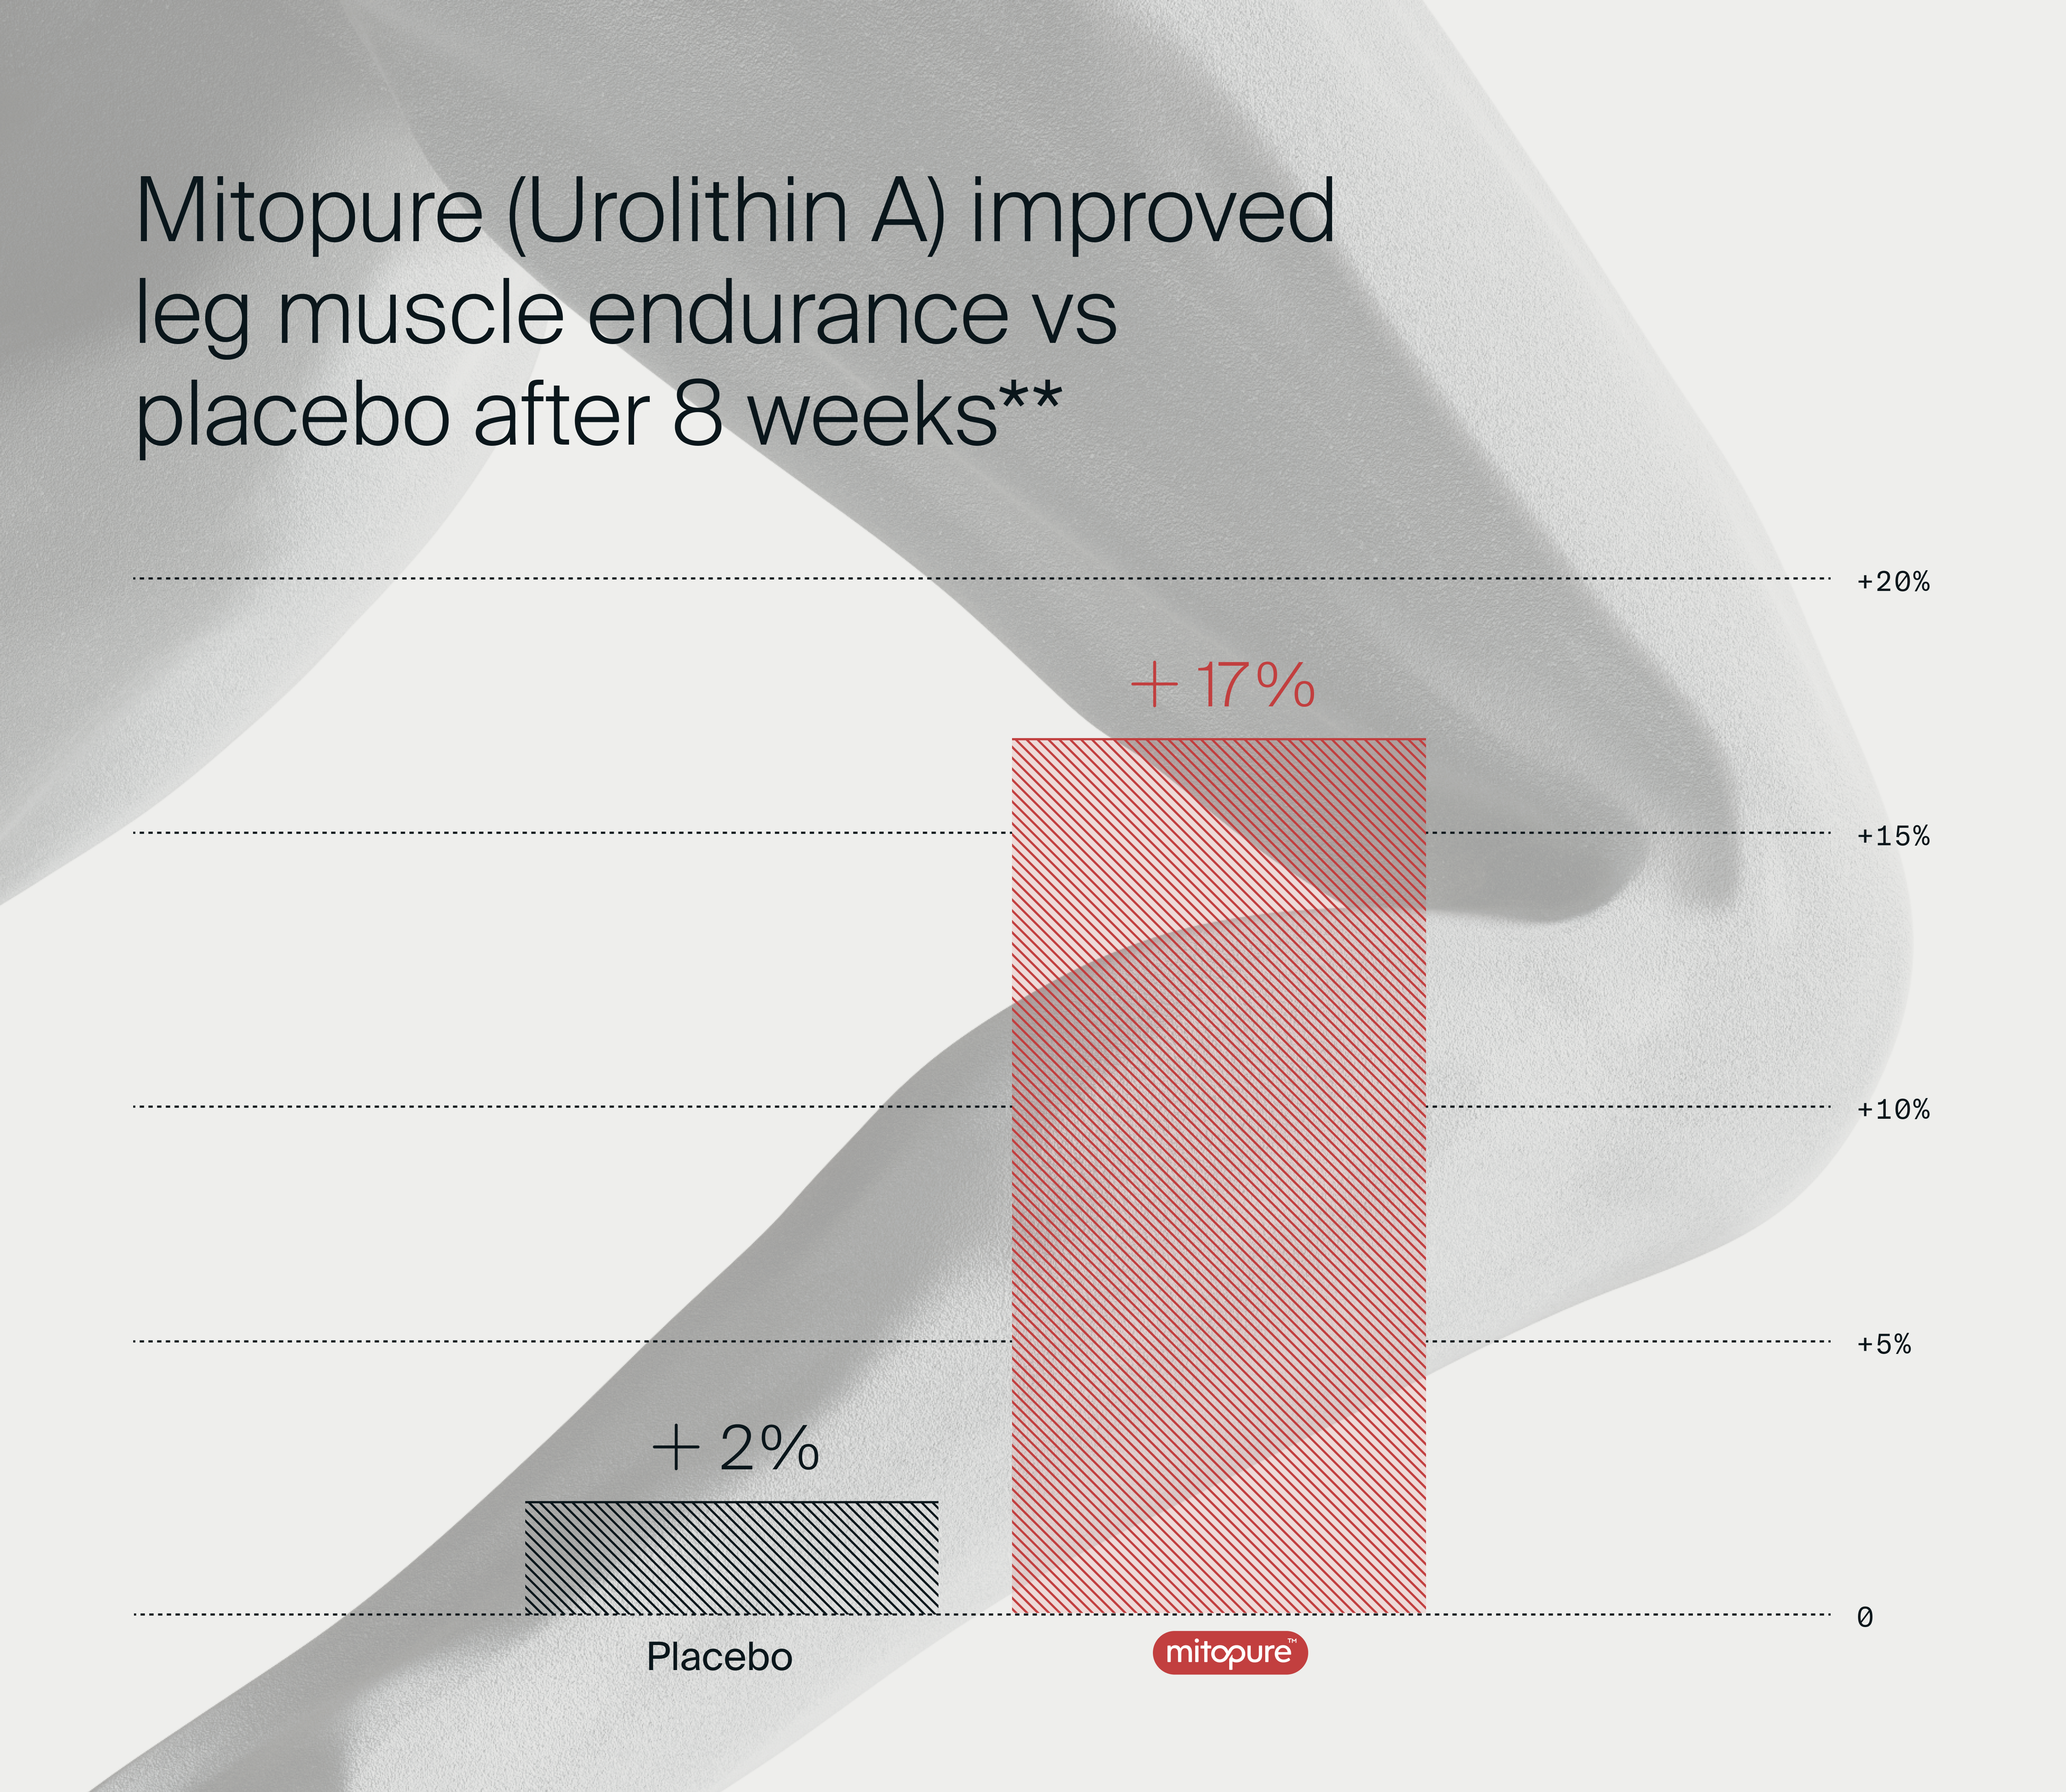 Change in muscle endurance after taking Mitopure